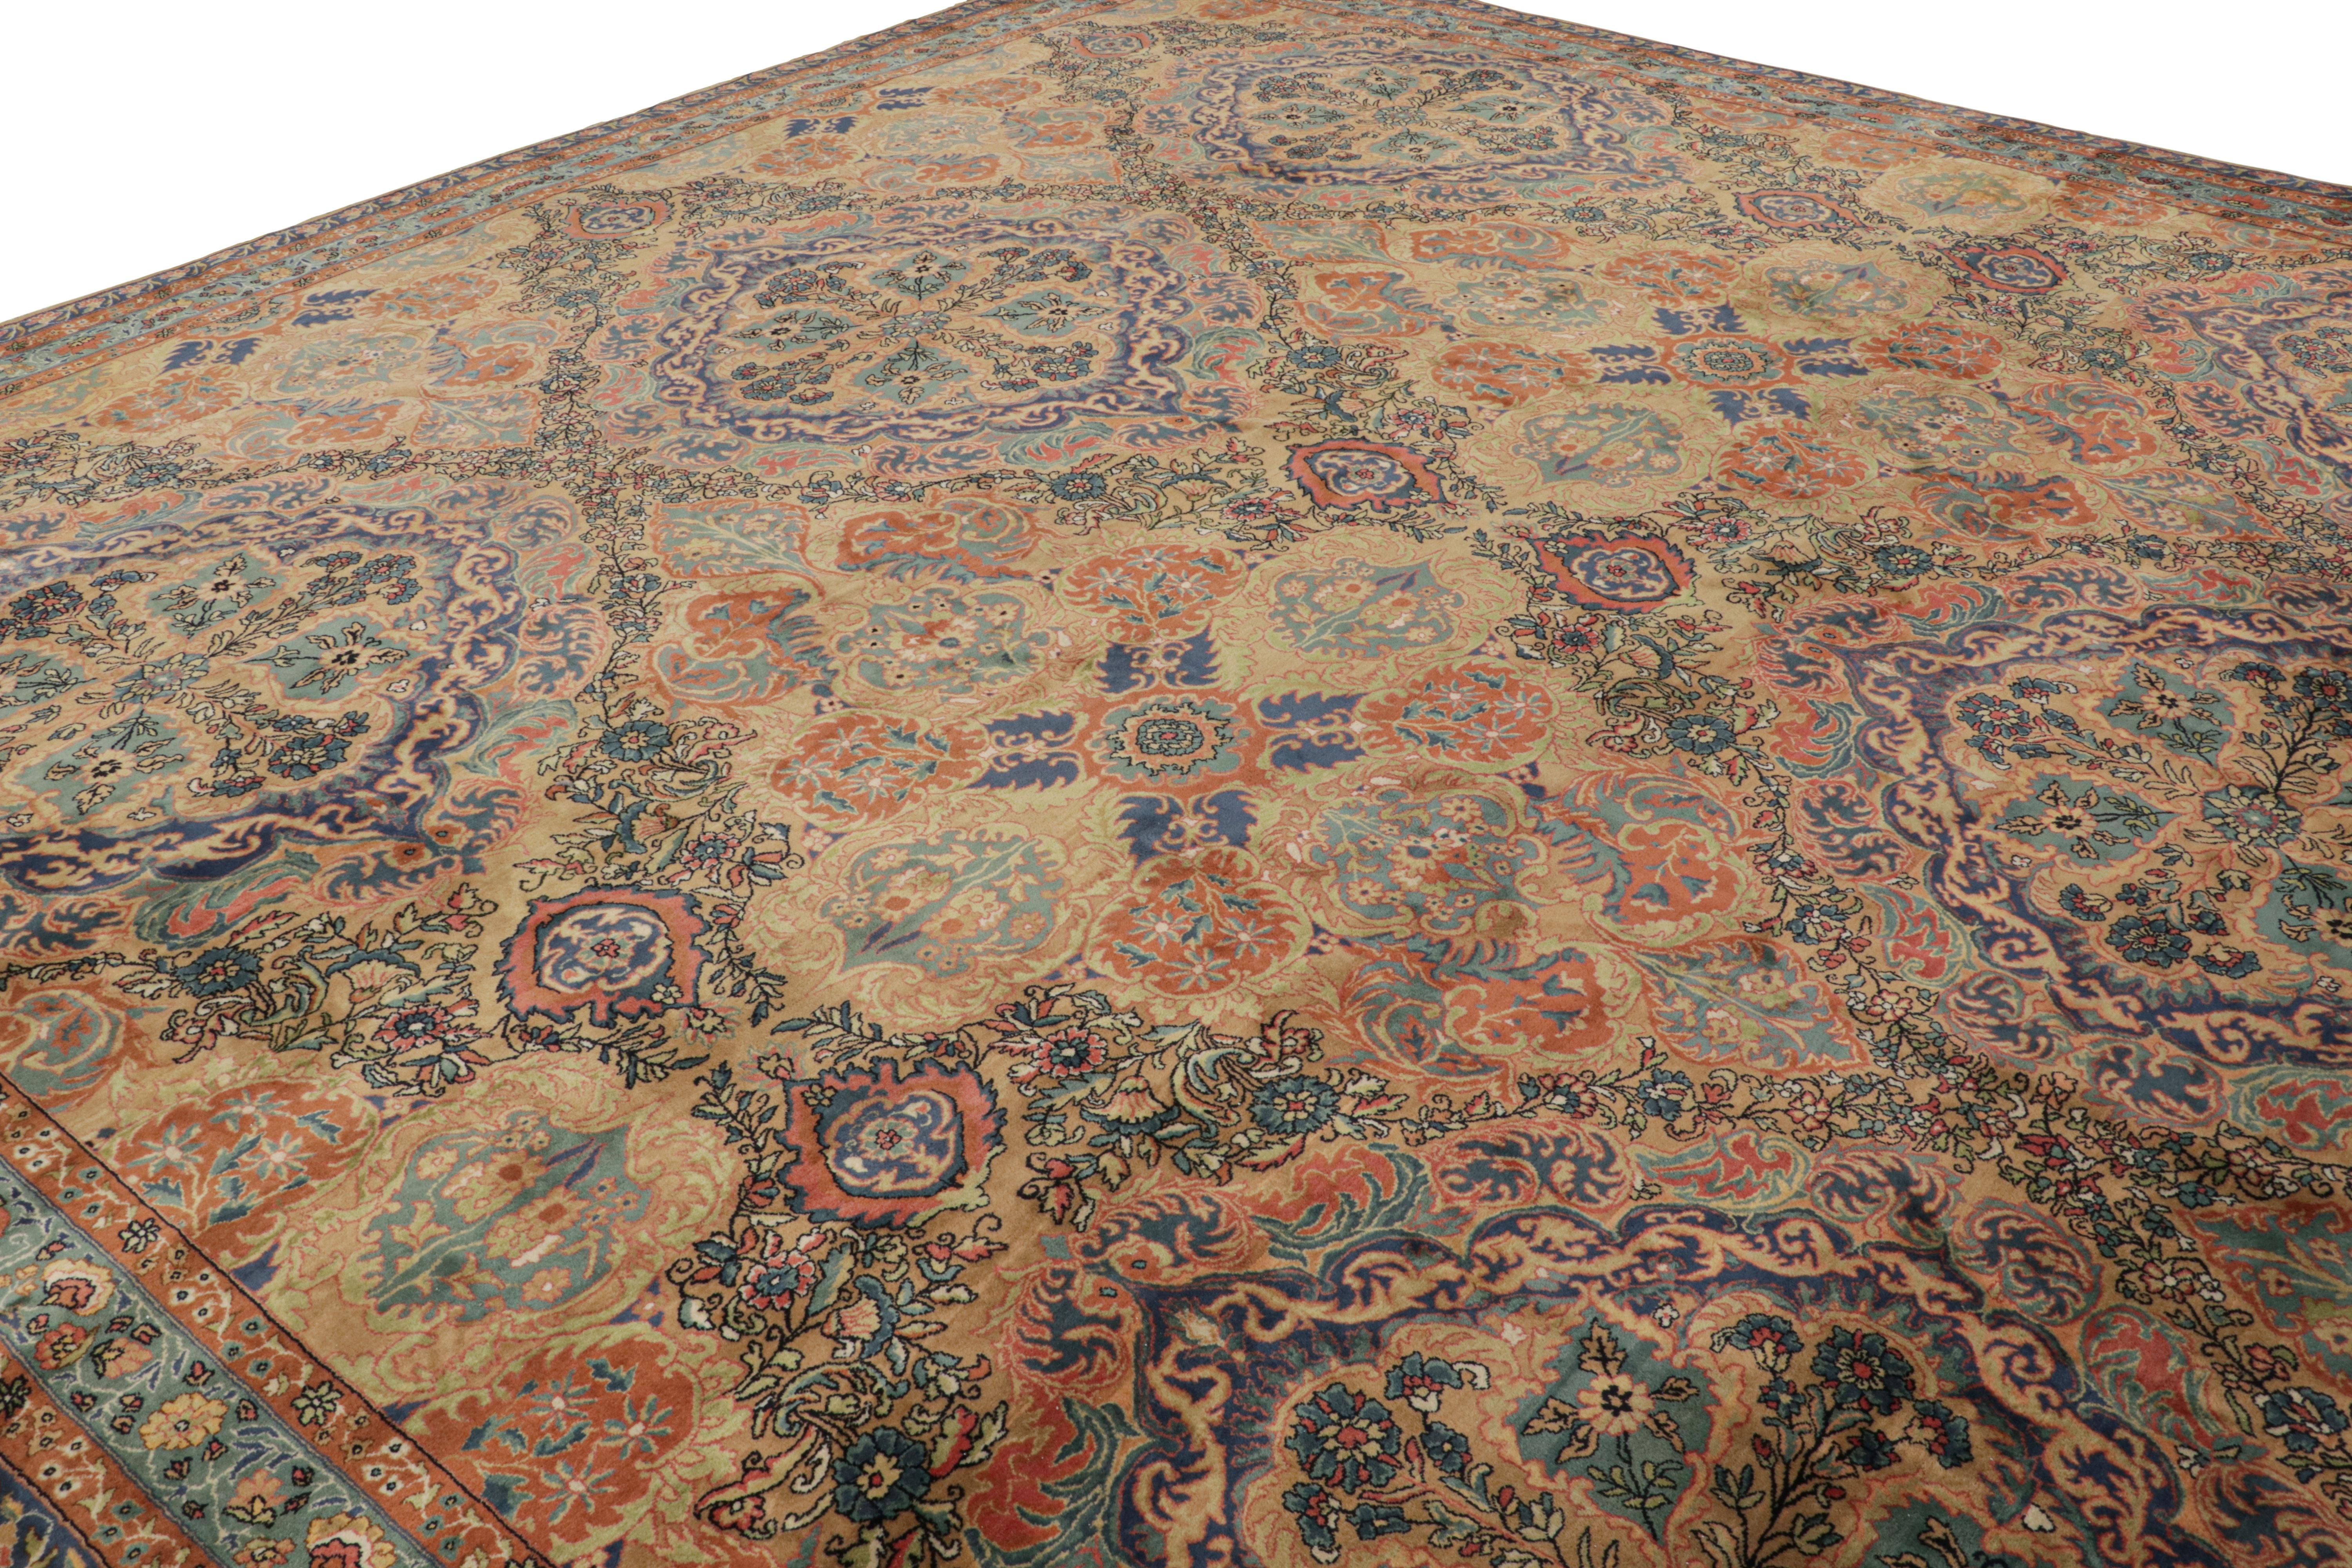 Hand-knotted in wool and originating from India circa (TBD), this 15x31 antique palace rug is inspired by Persian rugs of Kerman provenance, and is a rare, special new addition to our collection. 

On the Design: 

Camel tone beige-browns underscore